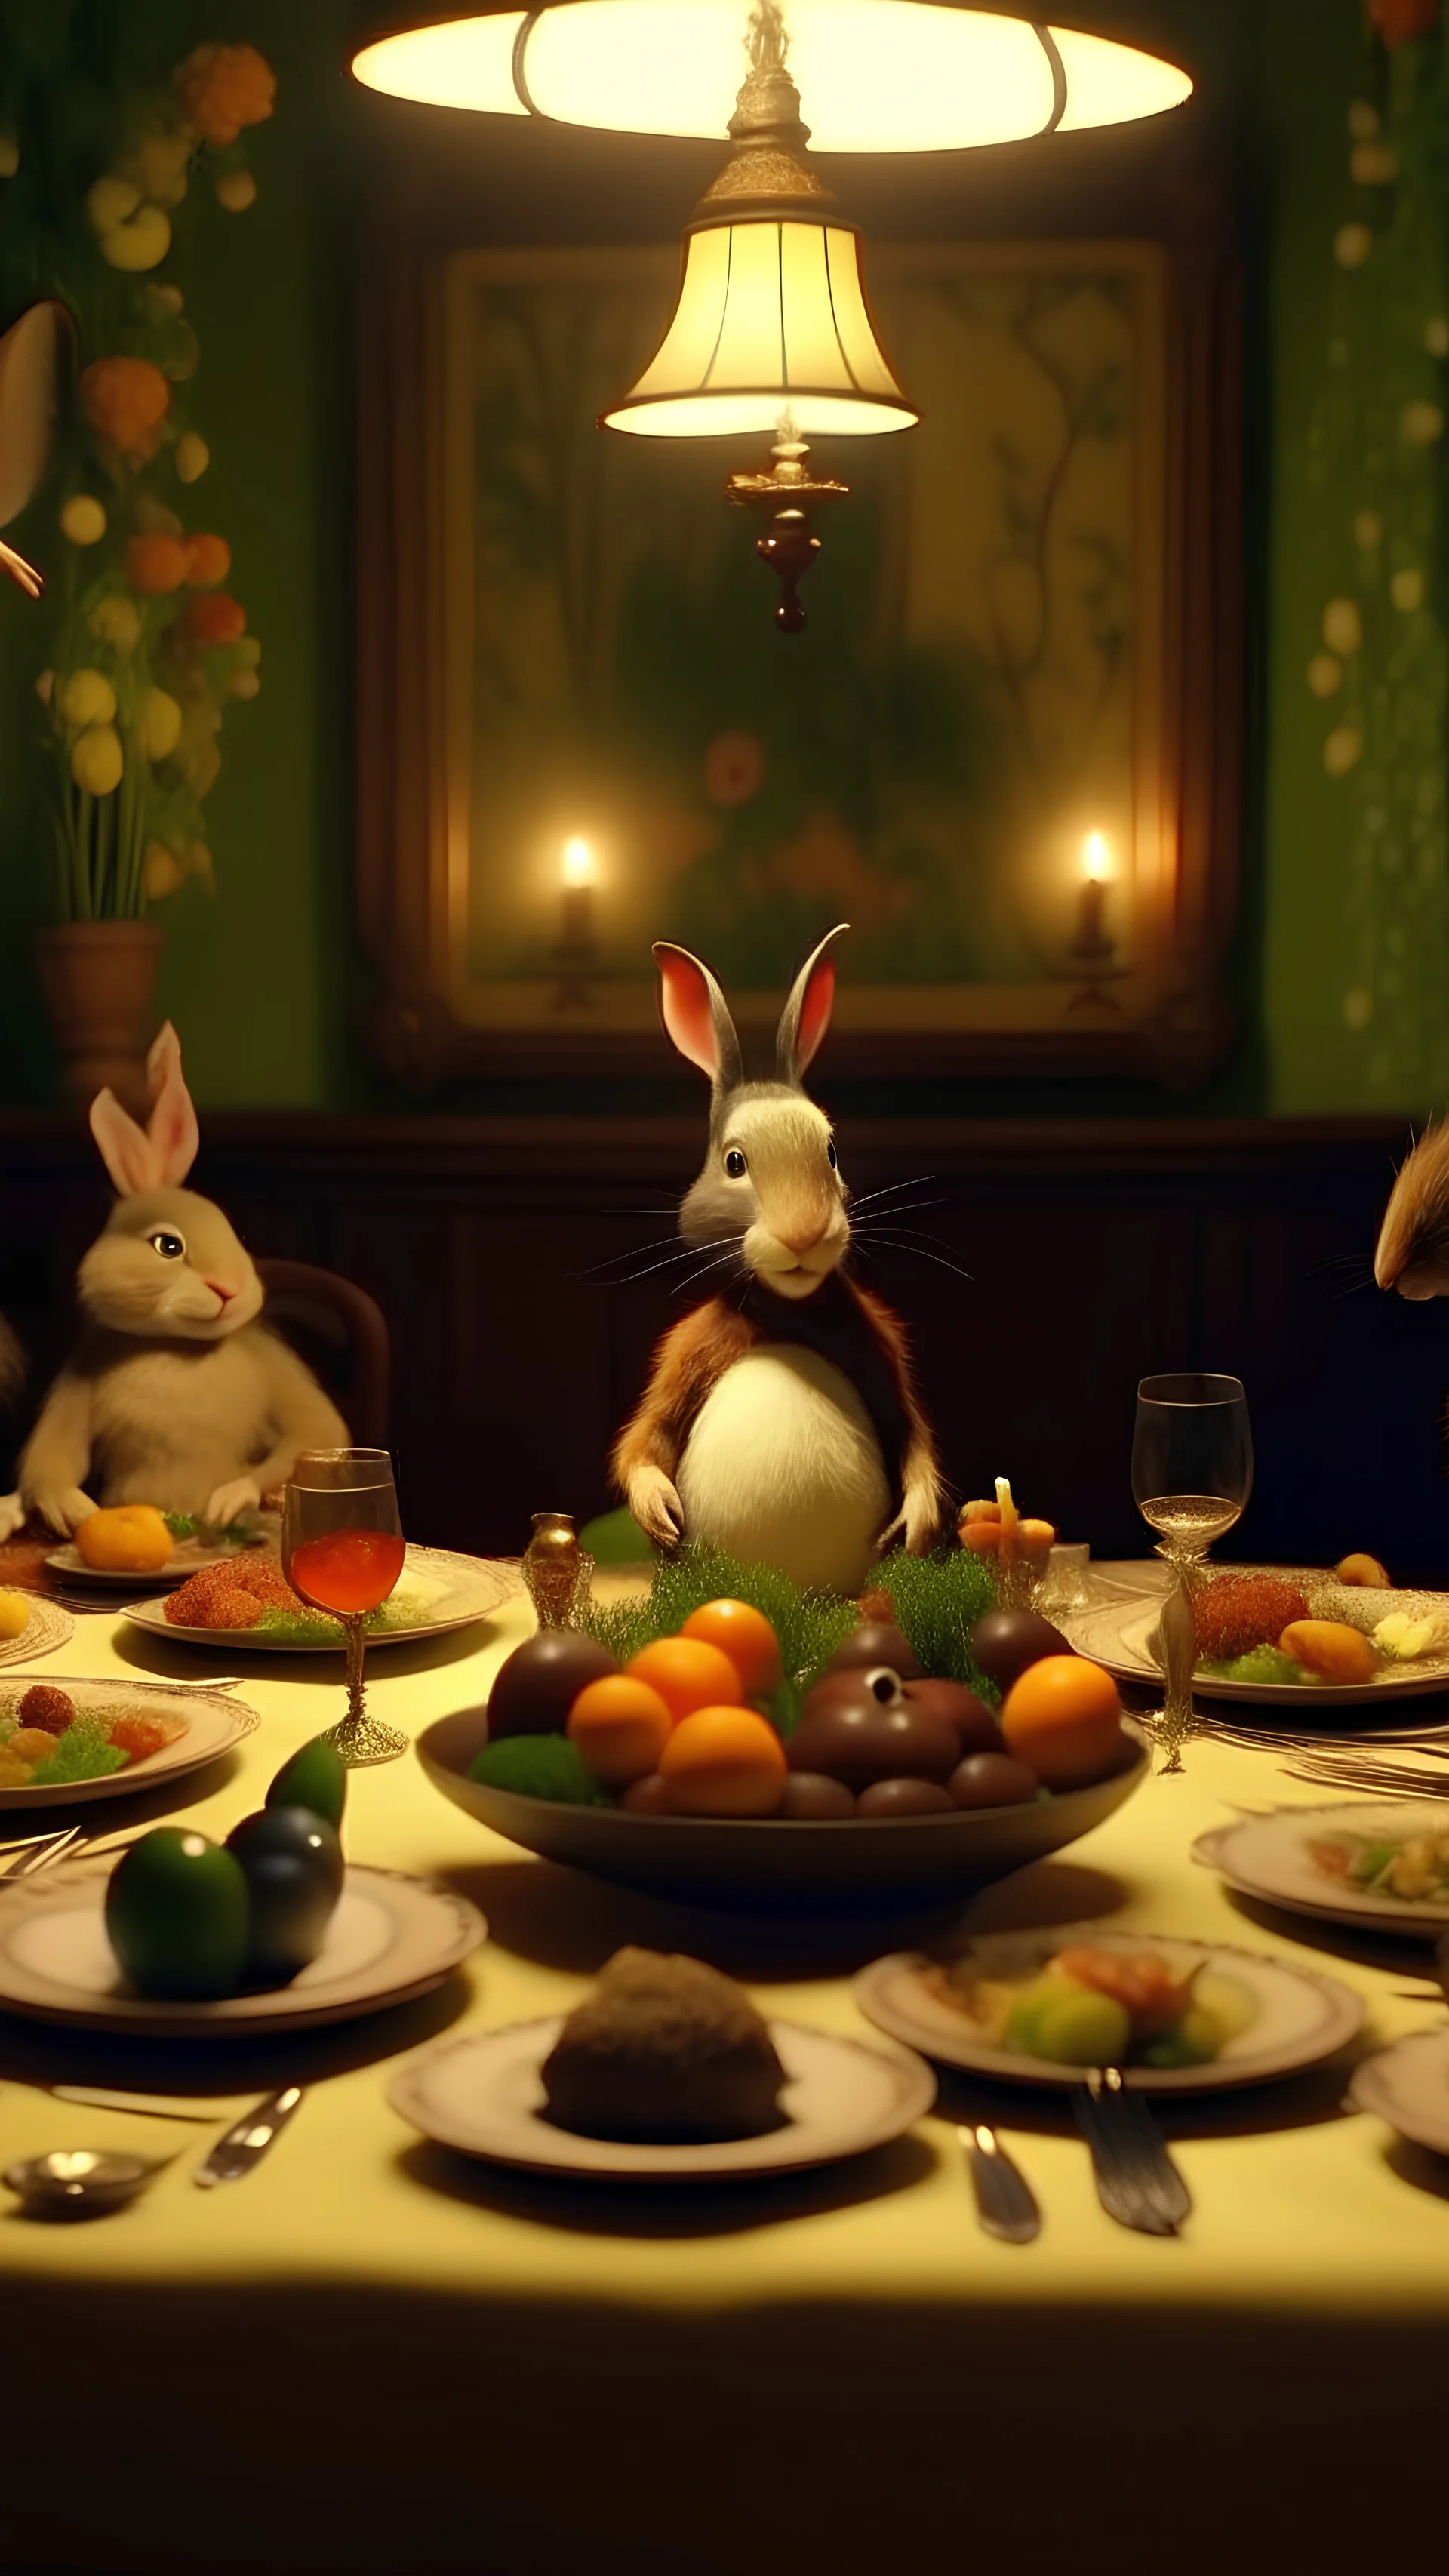 frame from a Wes Anderson film, full shot of the rabbit family at a sober celebration dinner in the Garden of Earthly Delights, small electric light bulbs on the table, birds on the table, grapes hanging, elegant and perfect composition